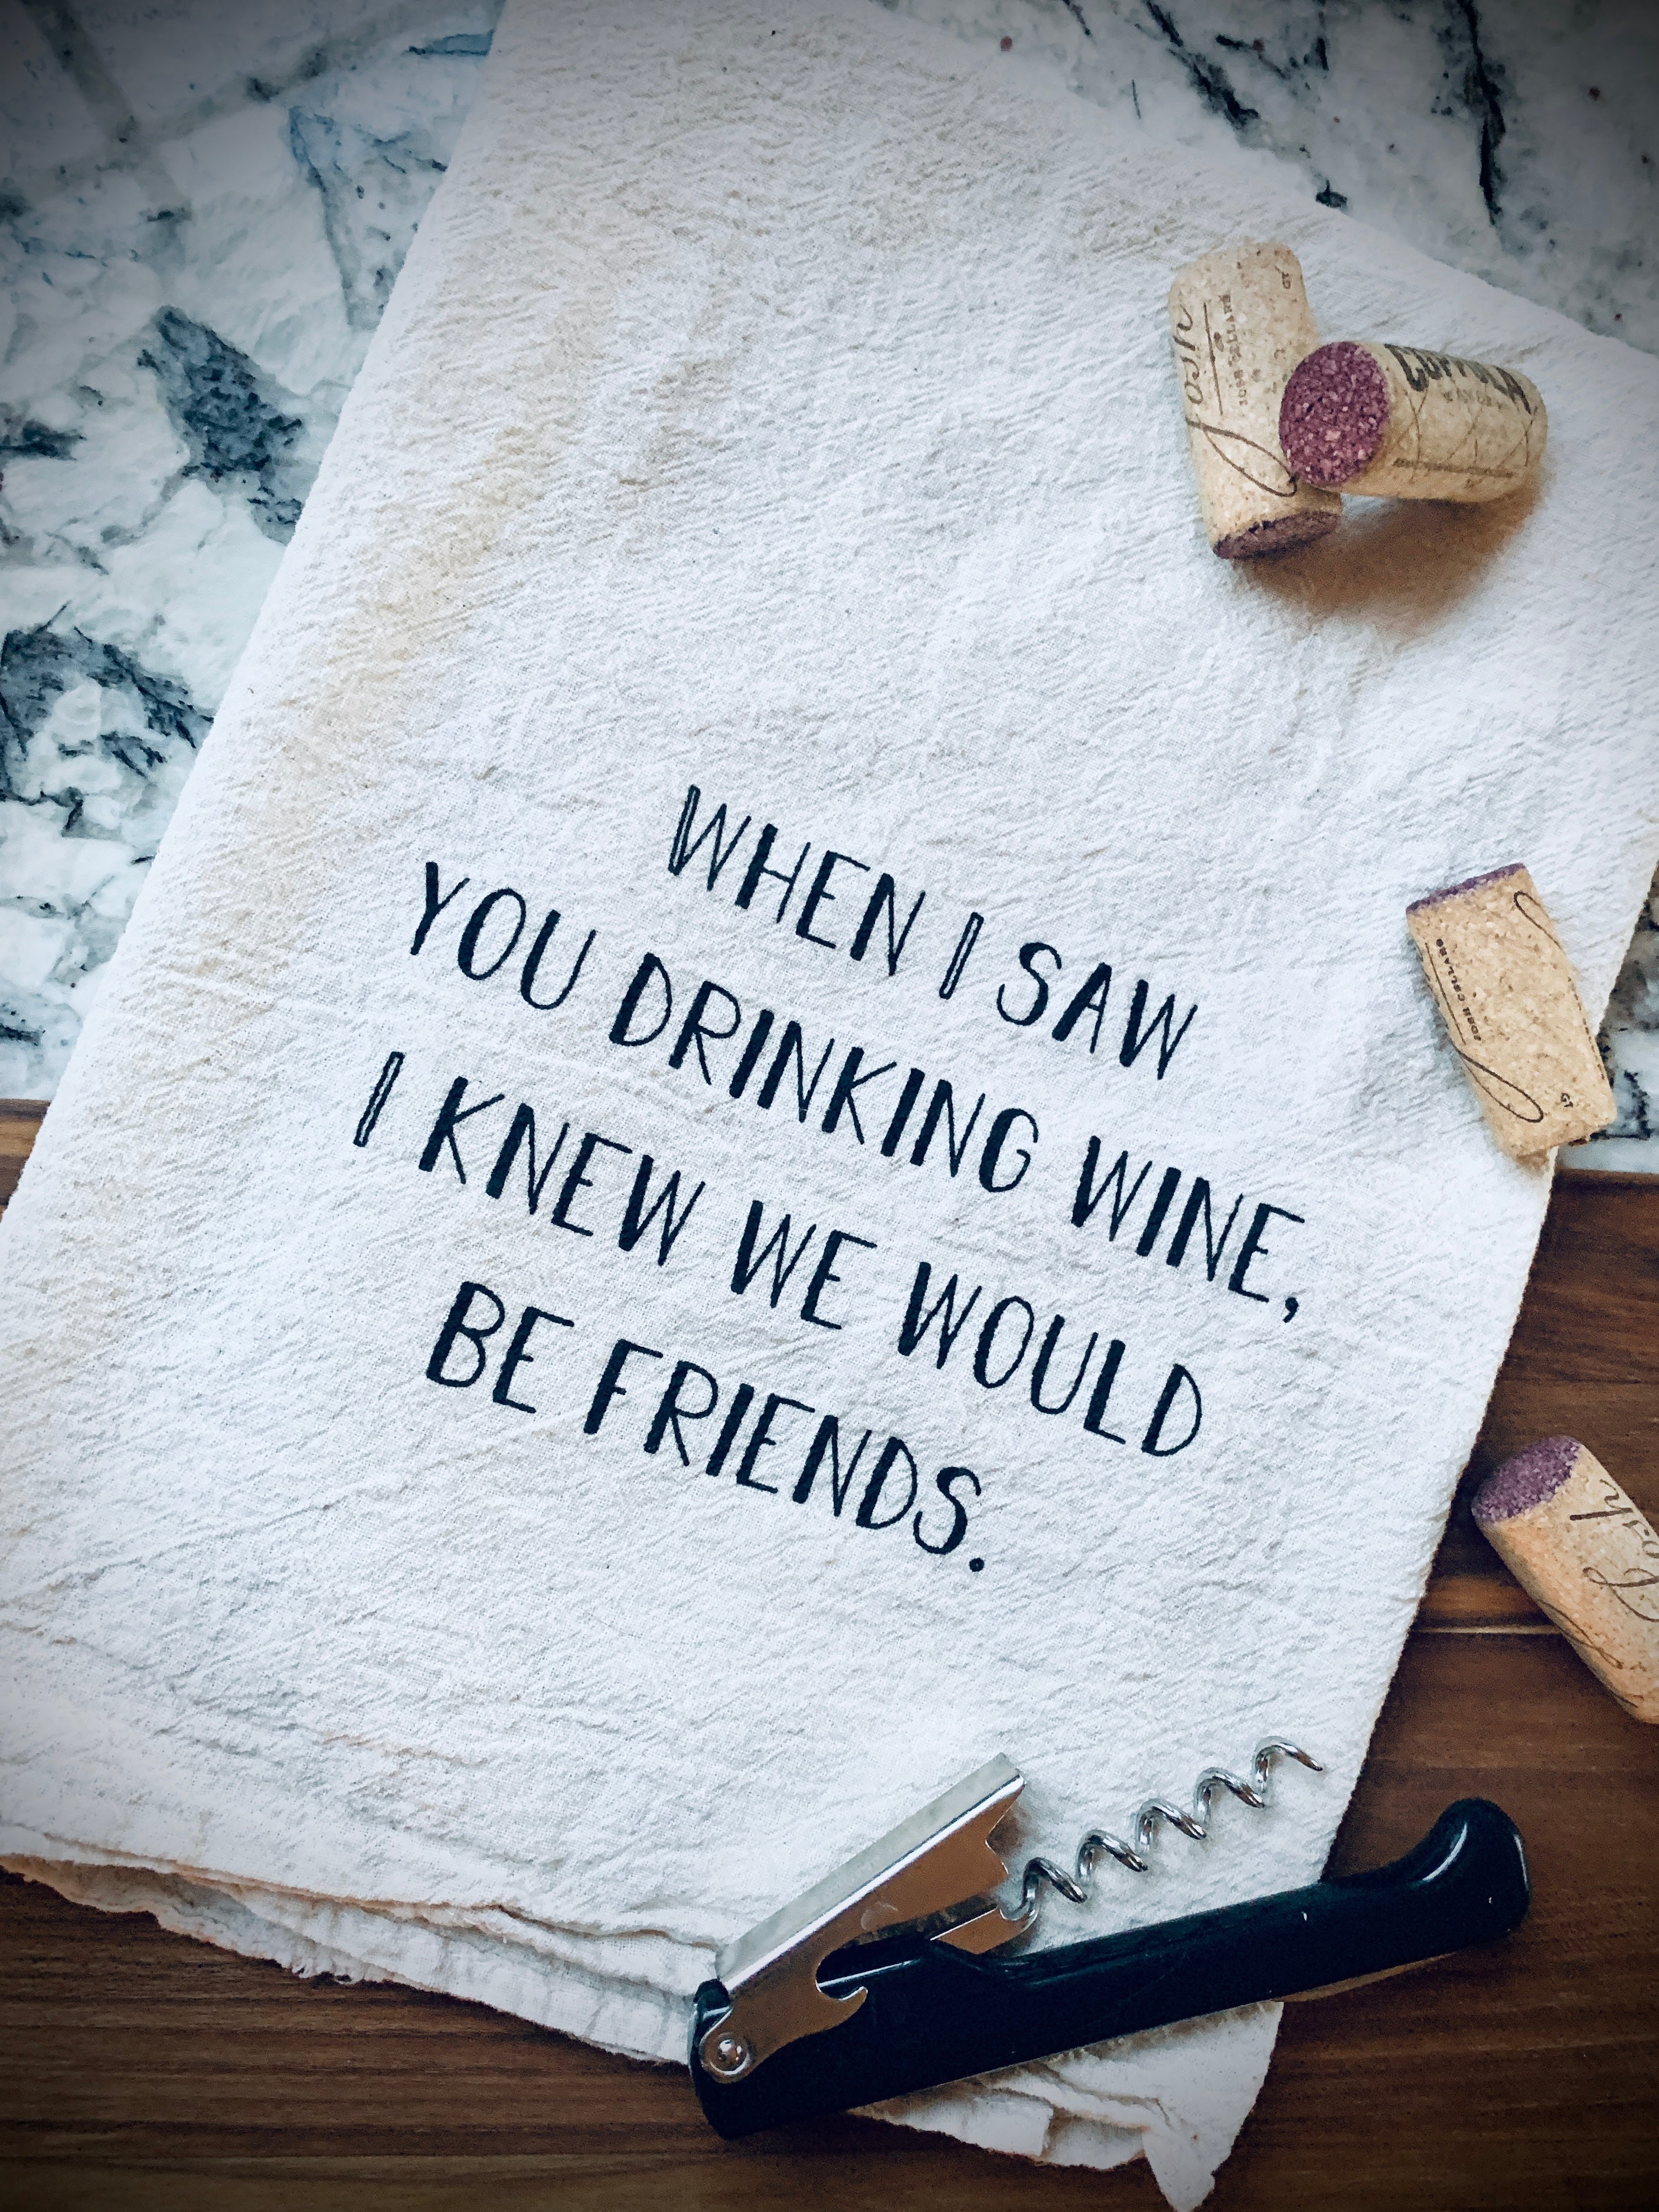 When I saw you drinking wine, I knew we would be friends.